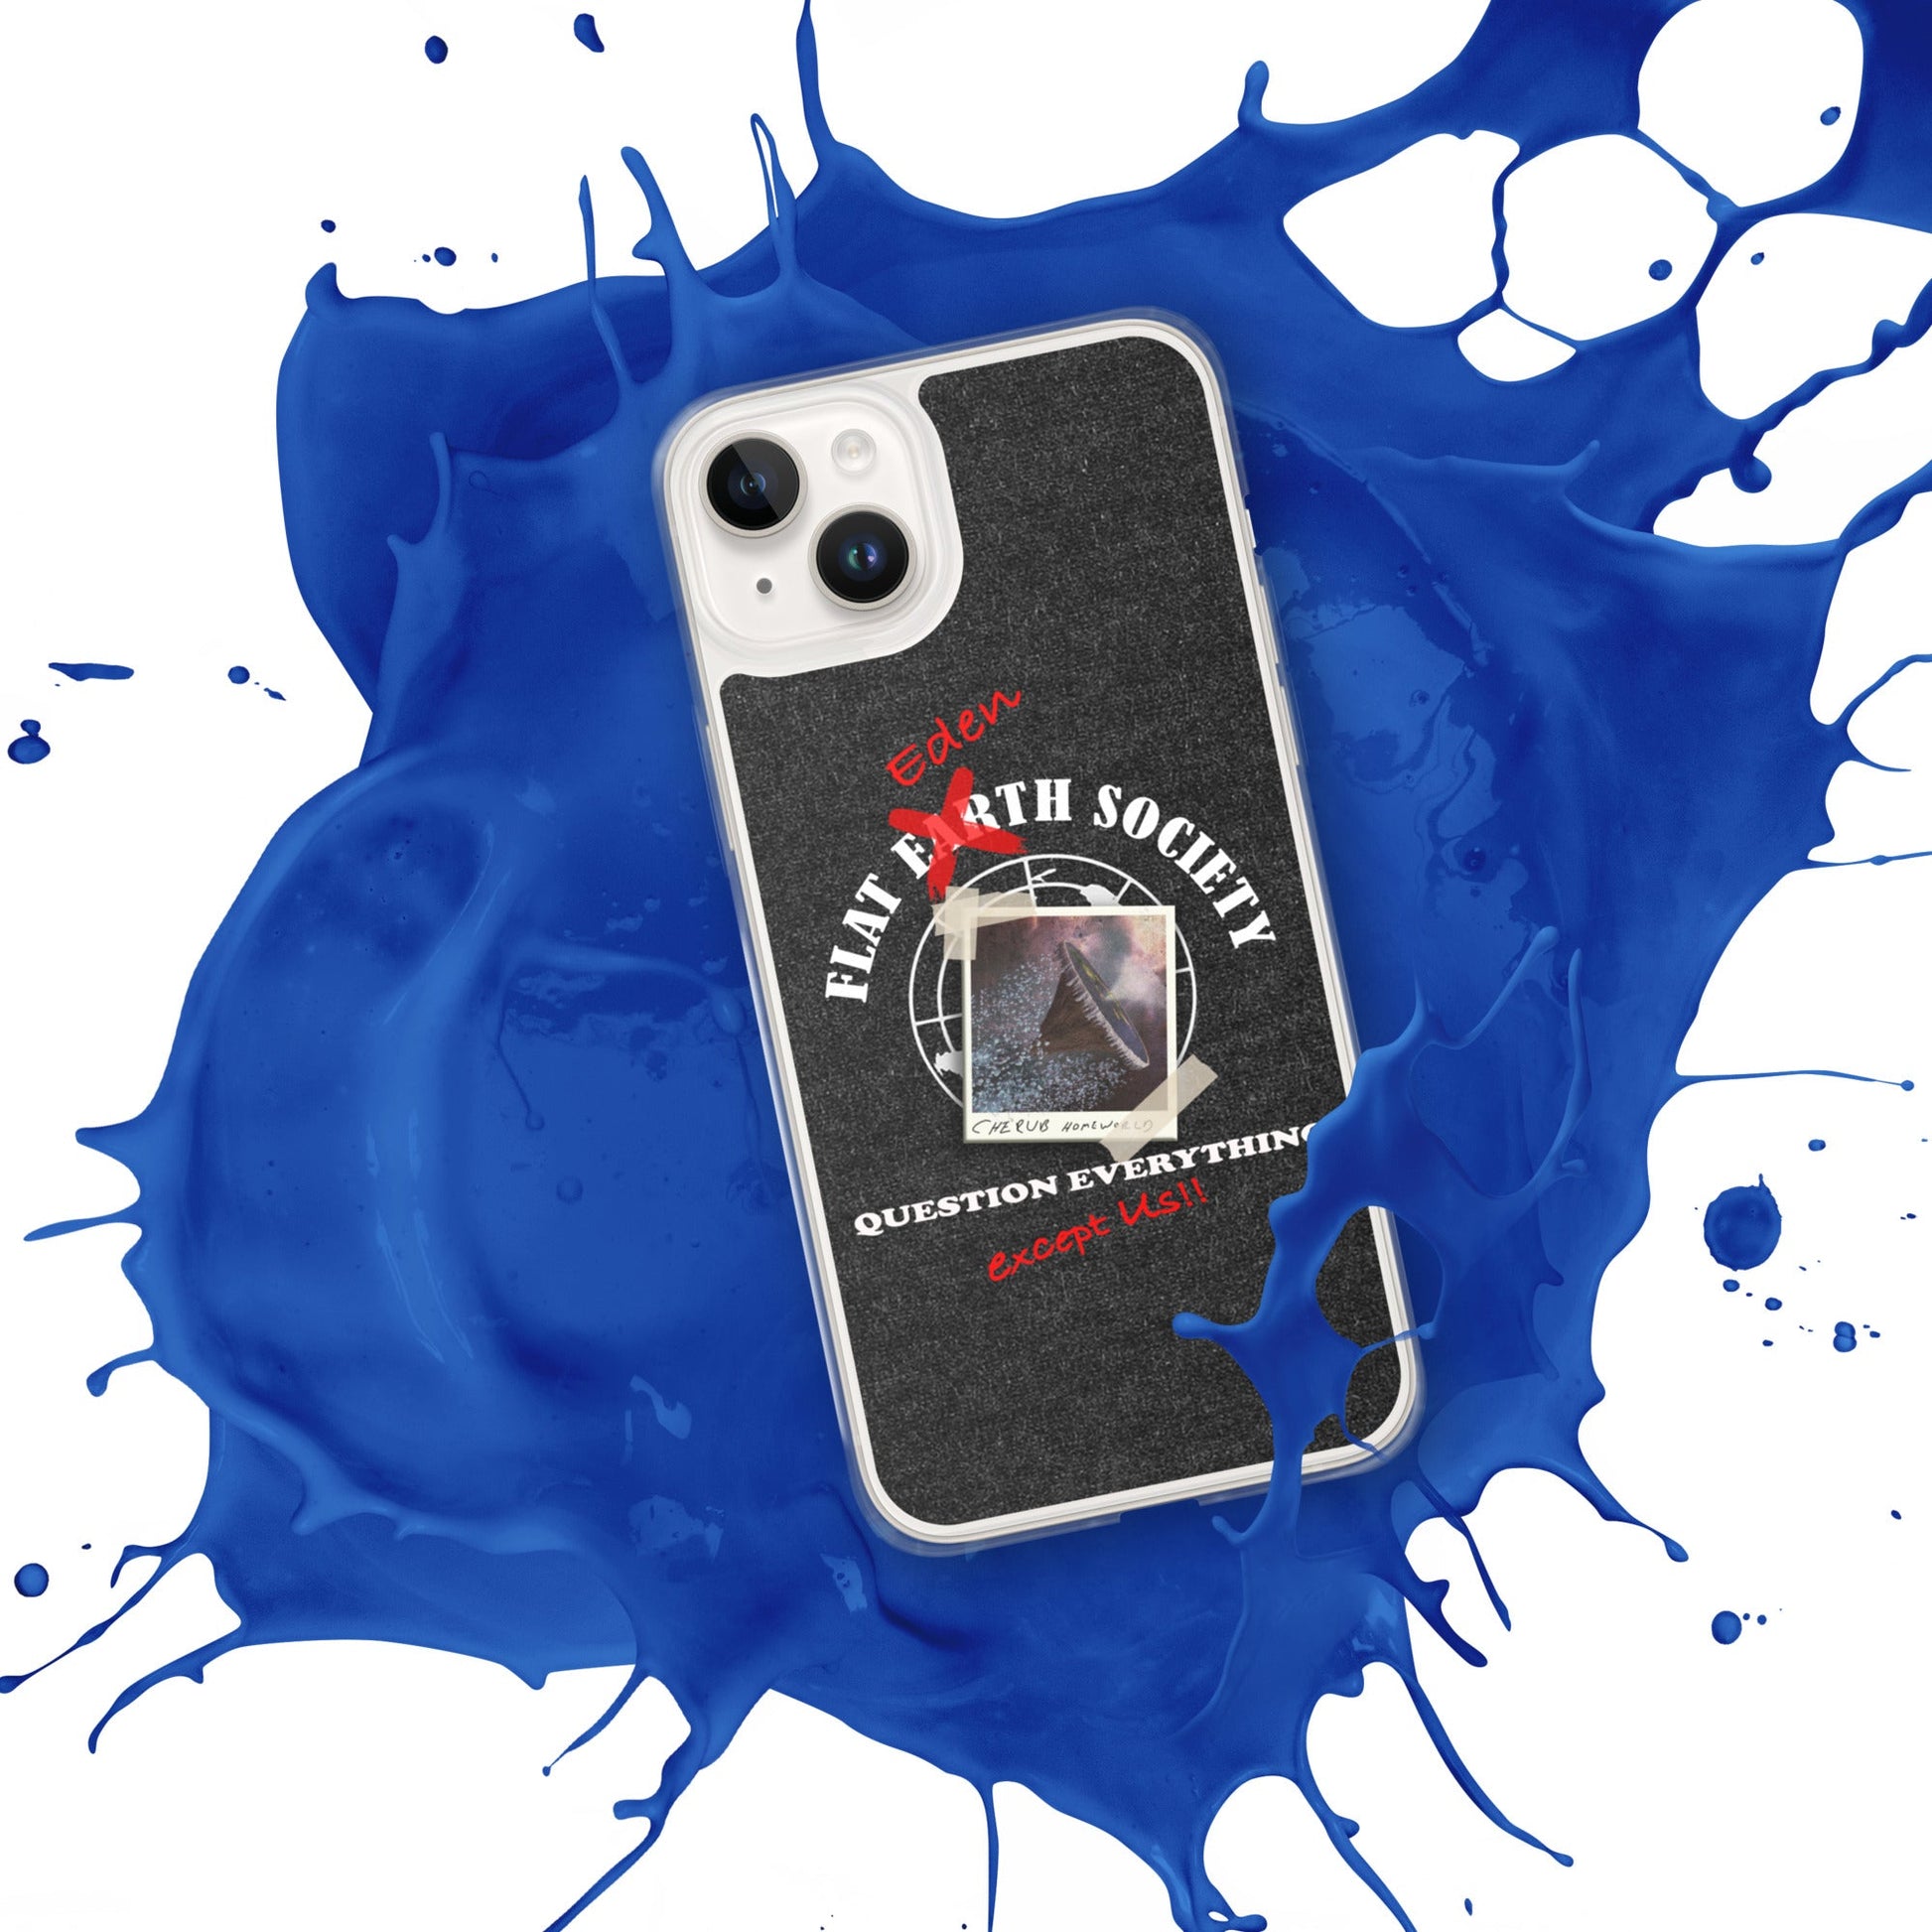 iPhone Case | Intergalactic Space Force 2 | Flat Eden Society - Spectral Ink Shop - Mobile Phone Cases -9780728_16242